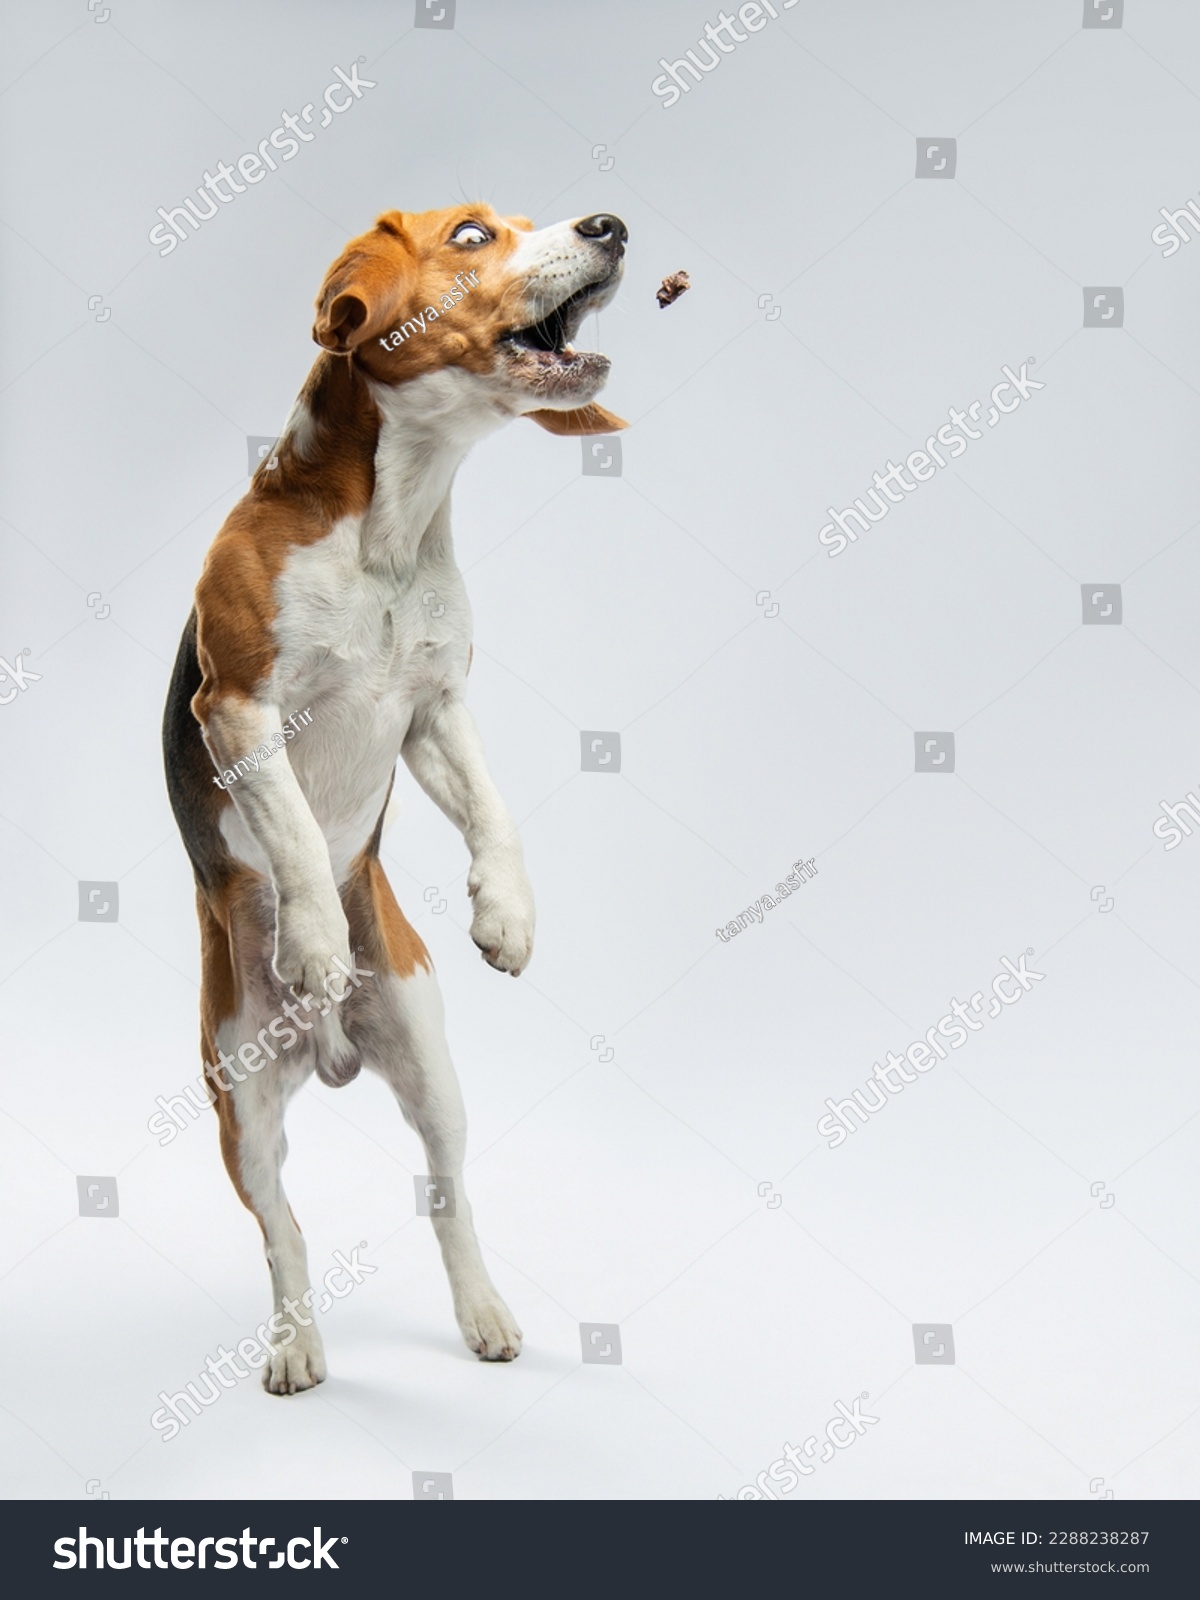 The beagle jumped up to catch a piece of food. A funny dog with bulging eyes is catching food. Portrait of a pet in motion in the studio on a light gray background. Dog food with fun #2288238287